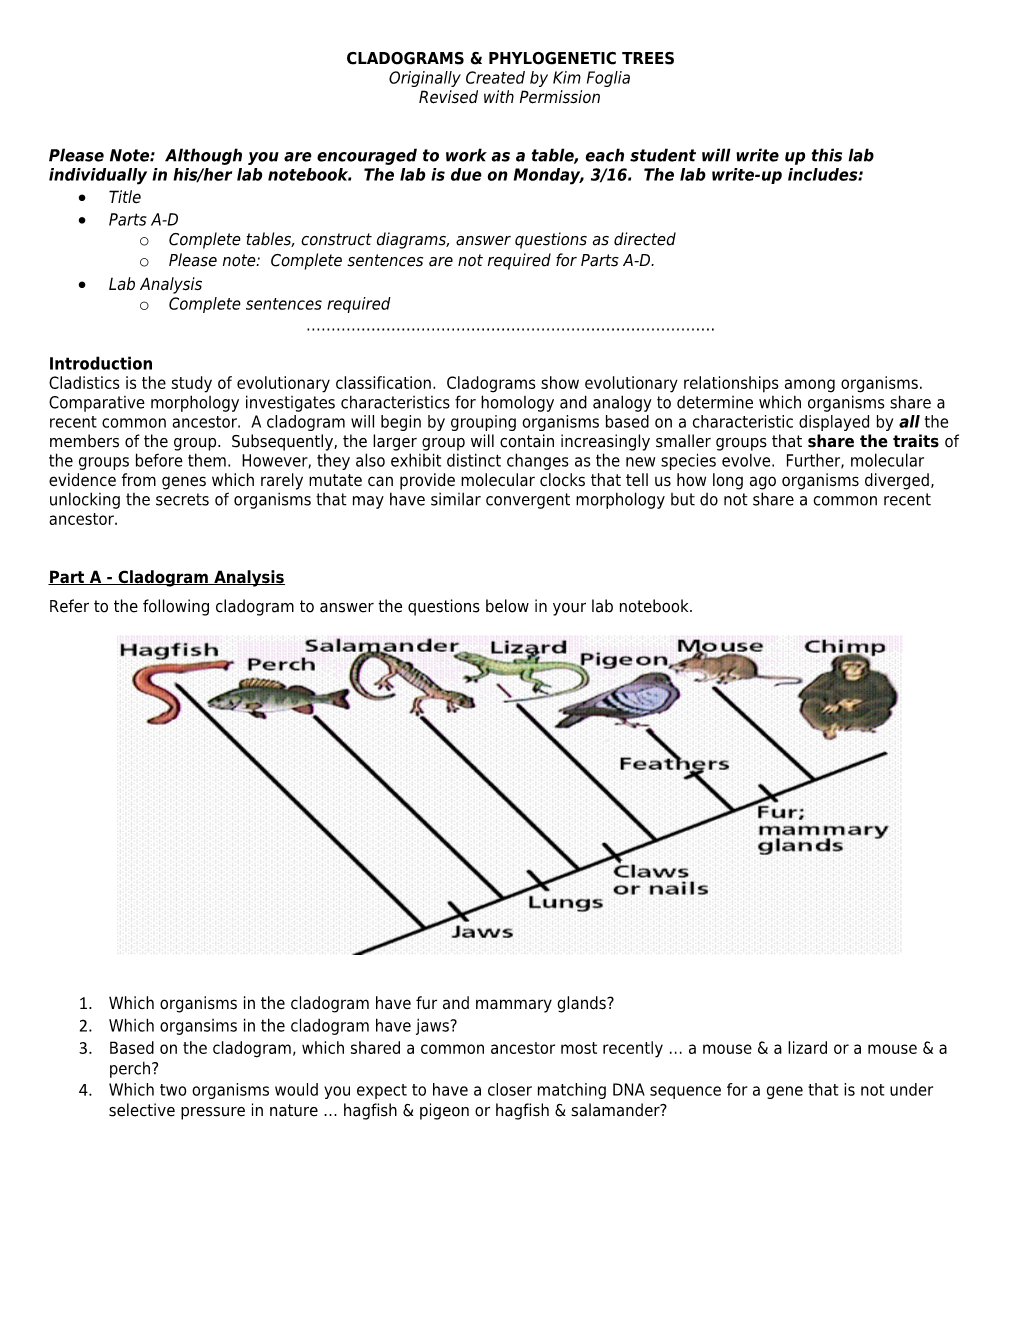 Cladograms & Phylogenetic Trees